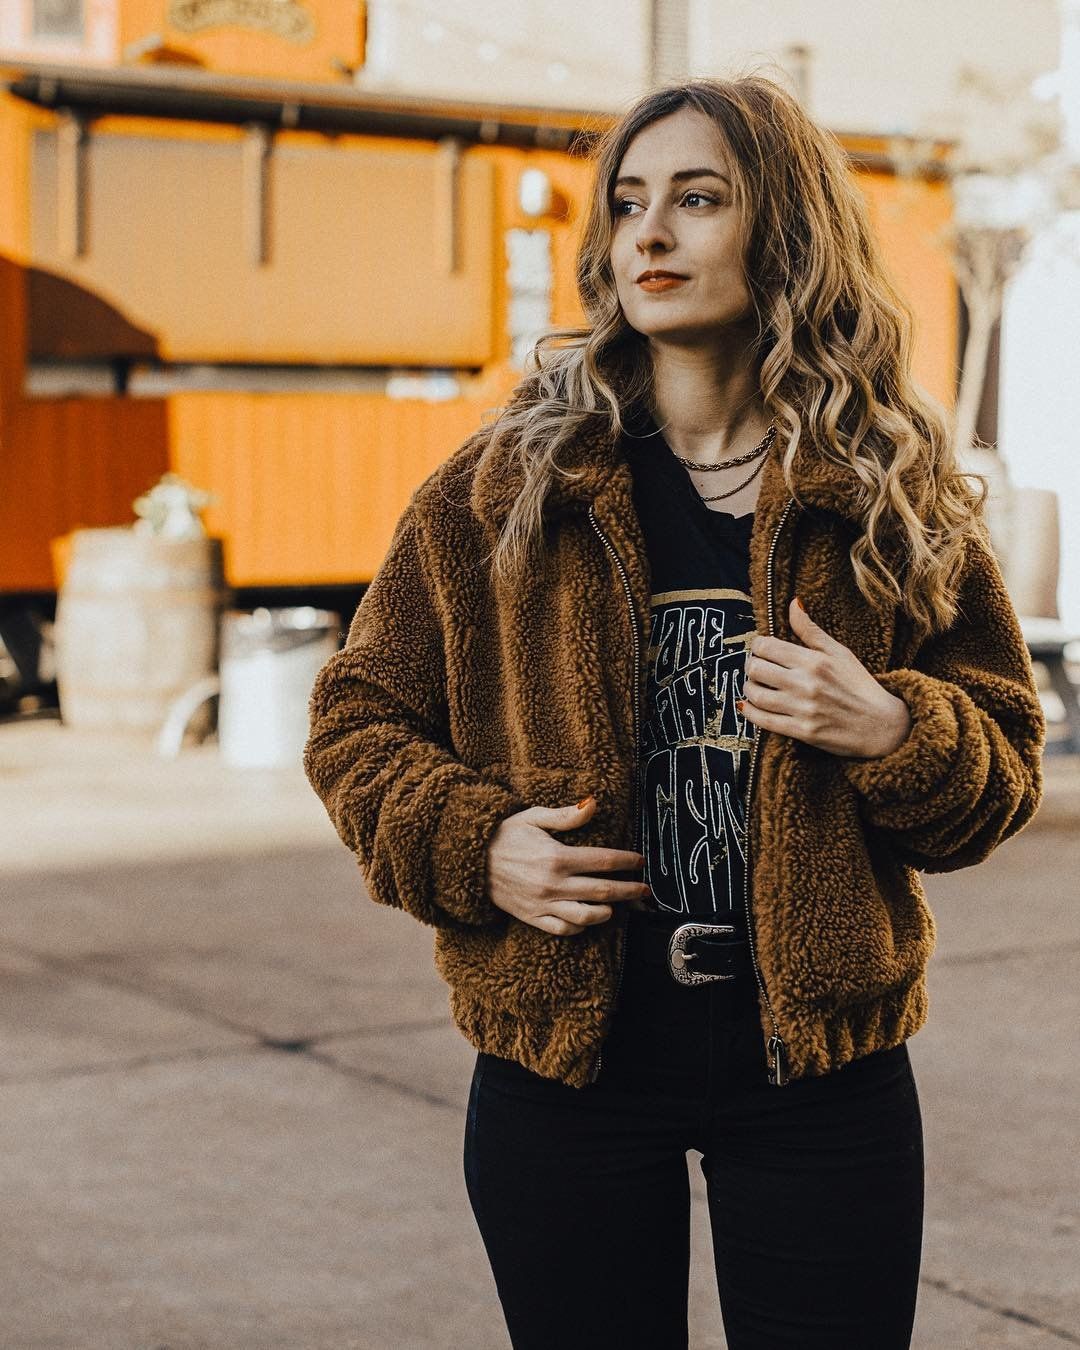 The Best Jackets For Girls Online And How To Wear - The Kosha Journal